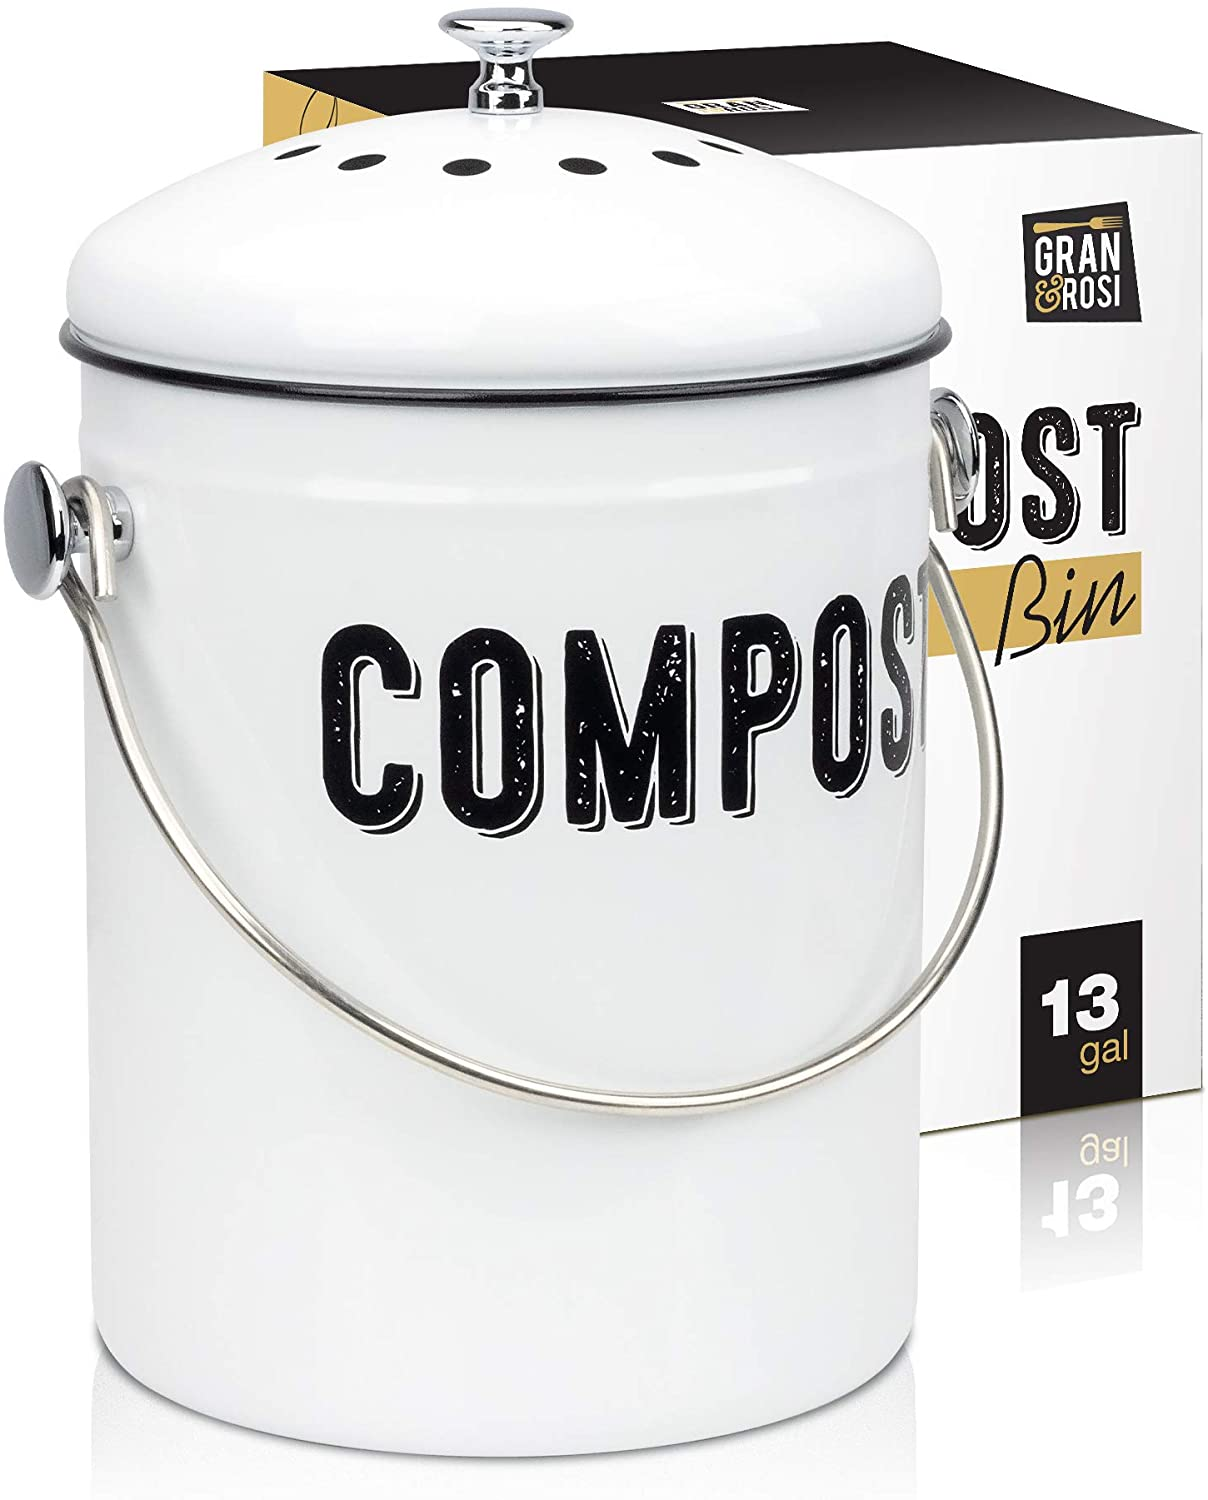 1 Year Later - Epica Compost Pail Review 